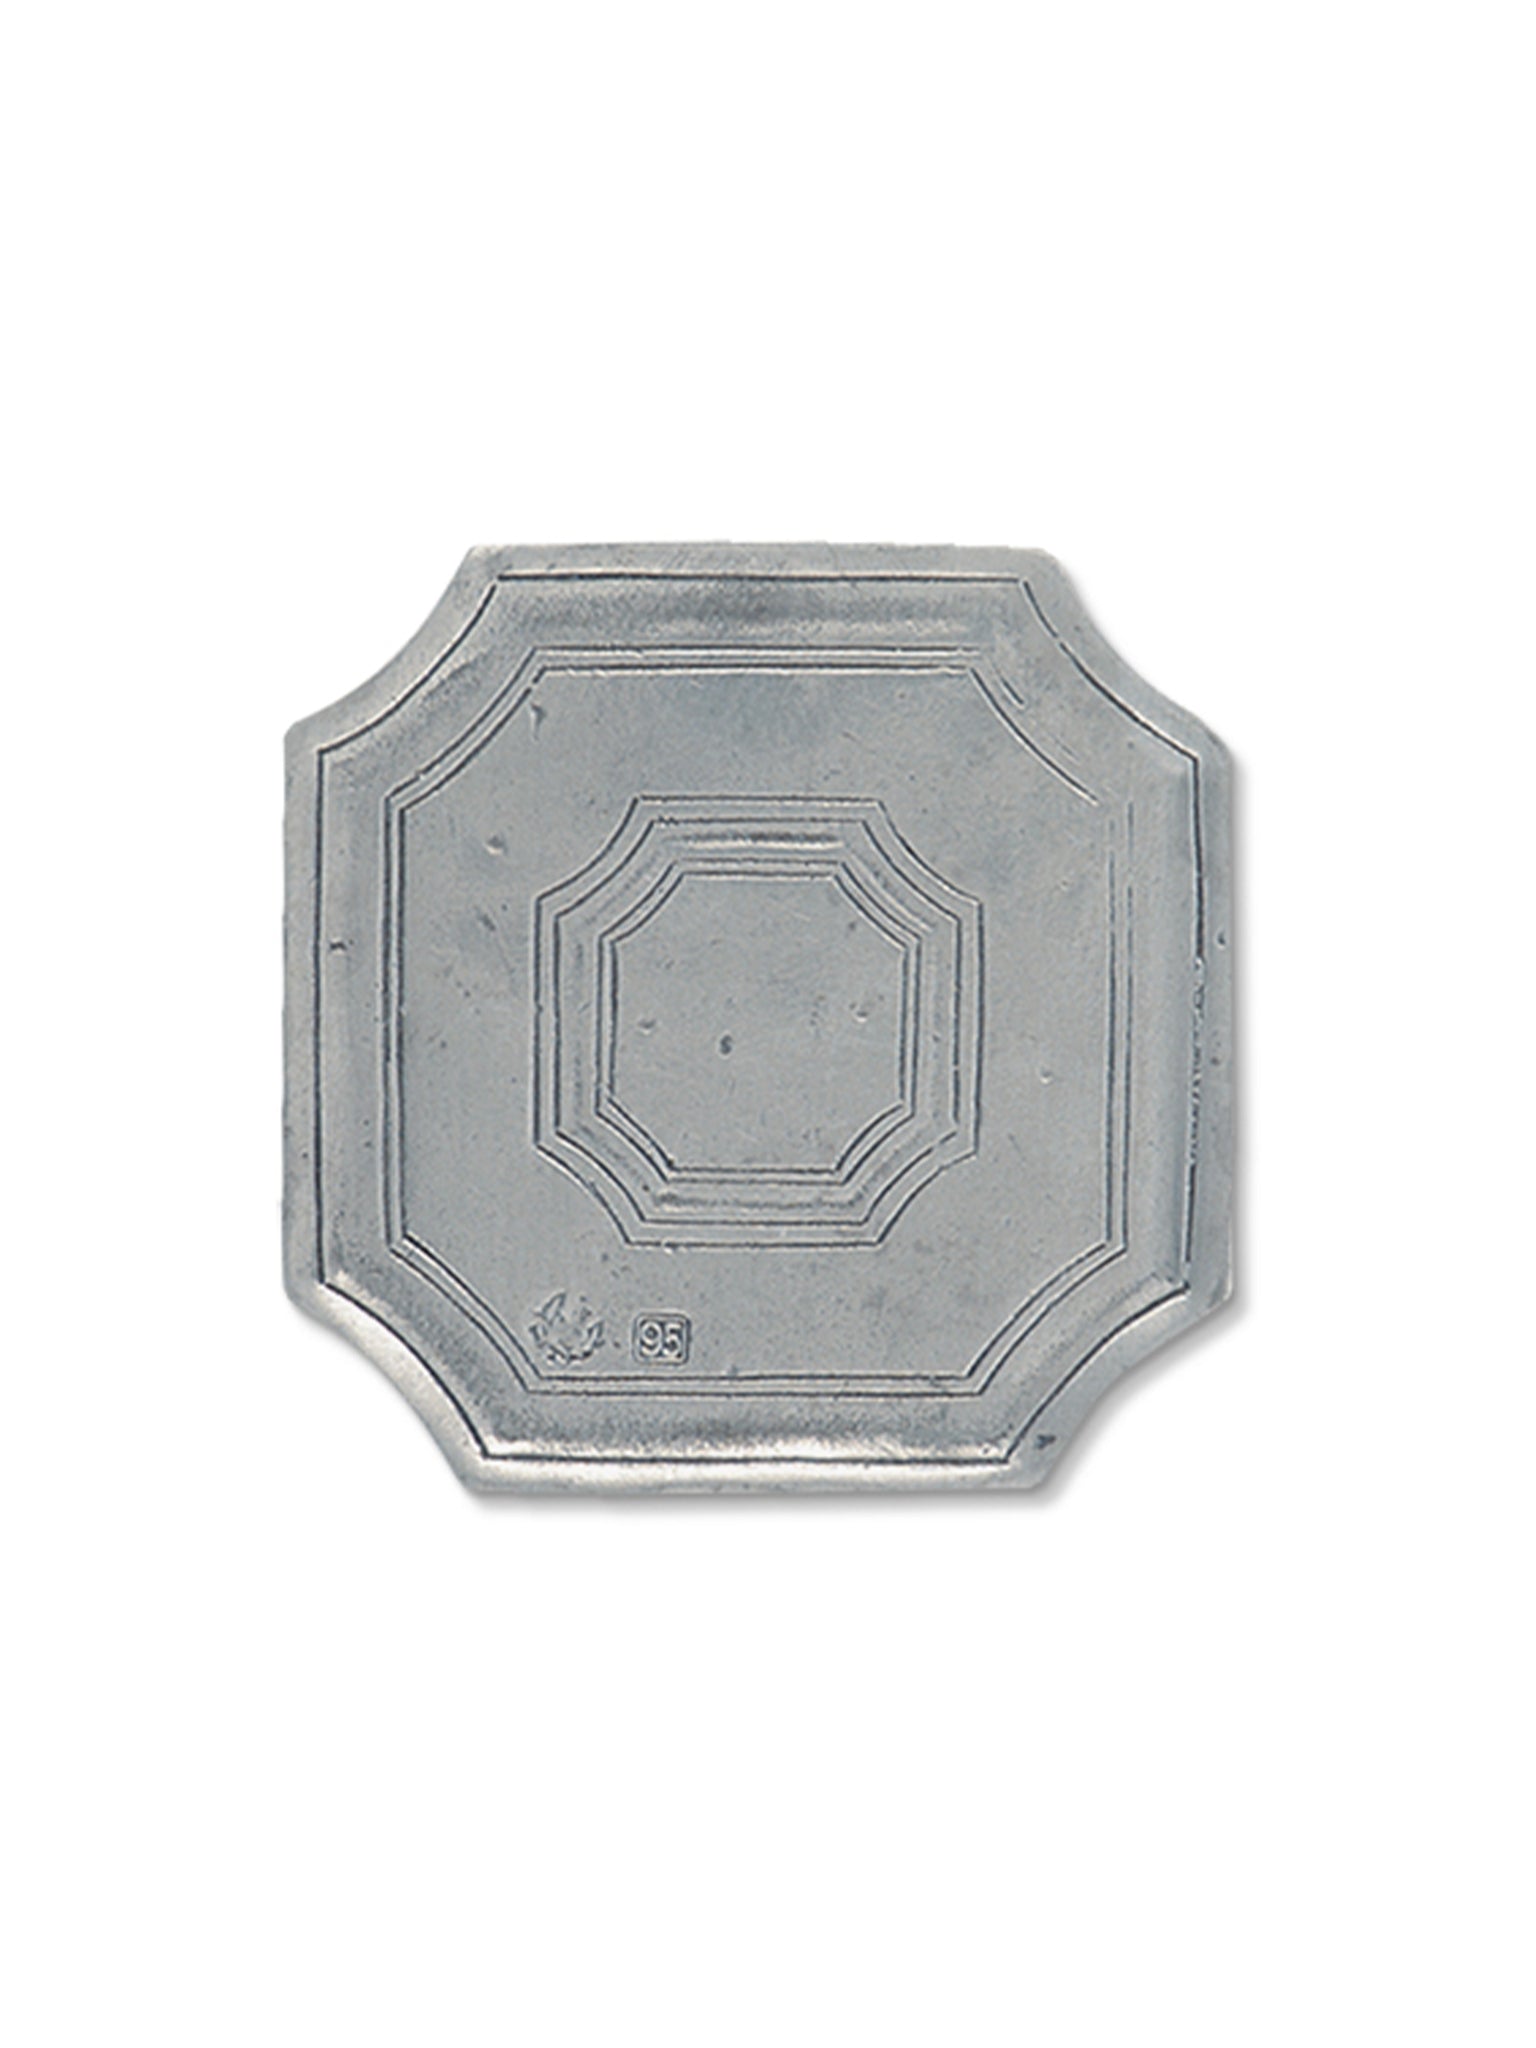 MATCH Pewter Small Octagonal Trivet Weston Table